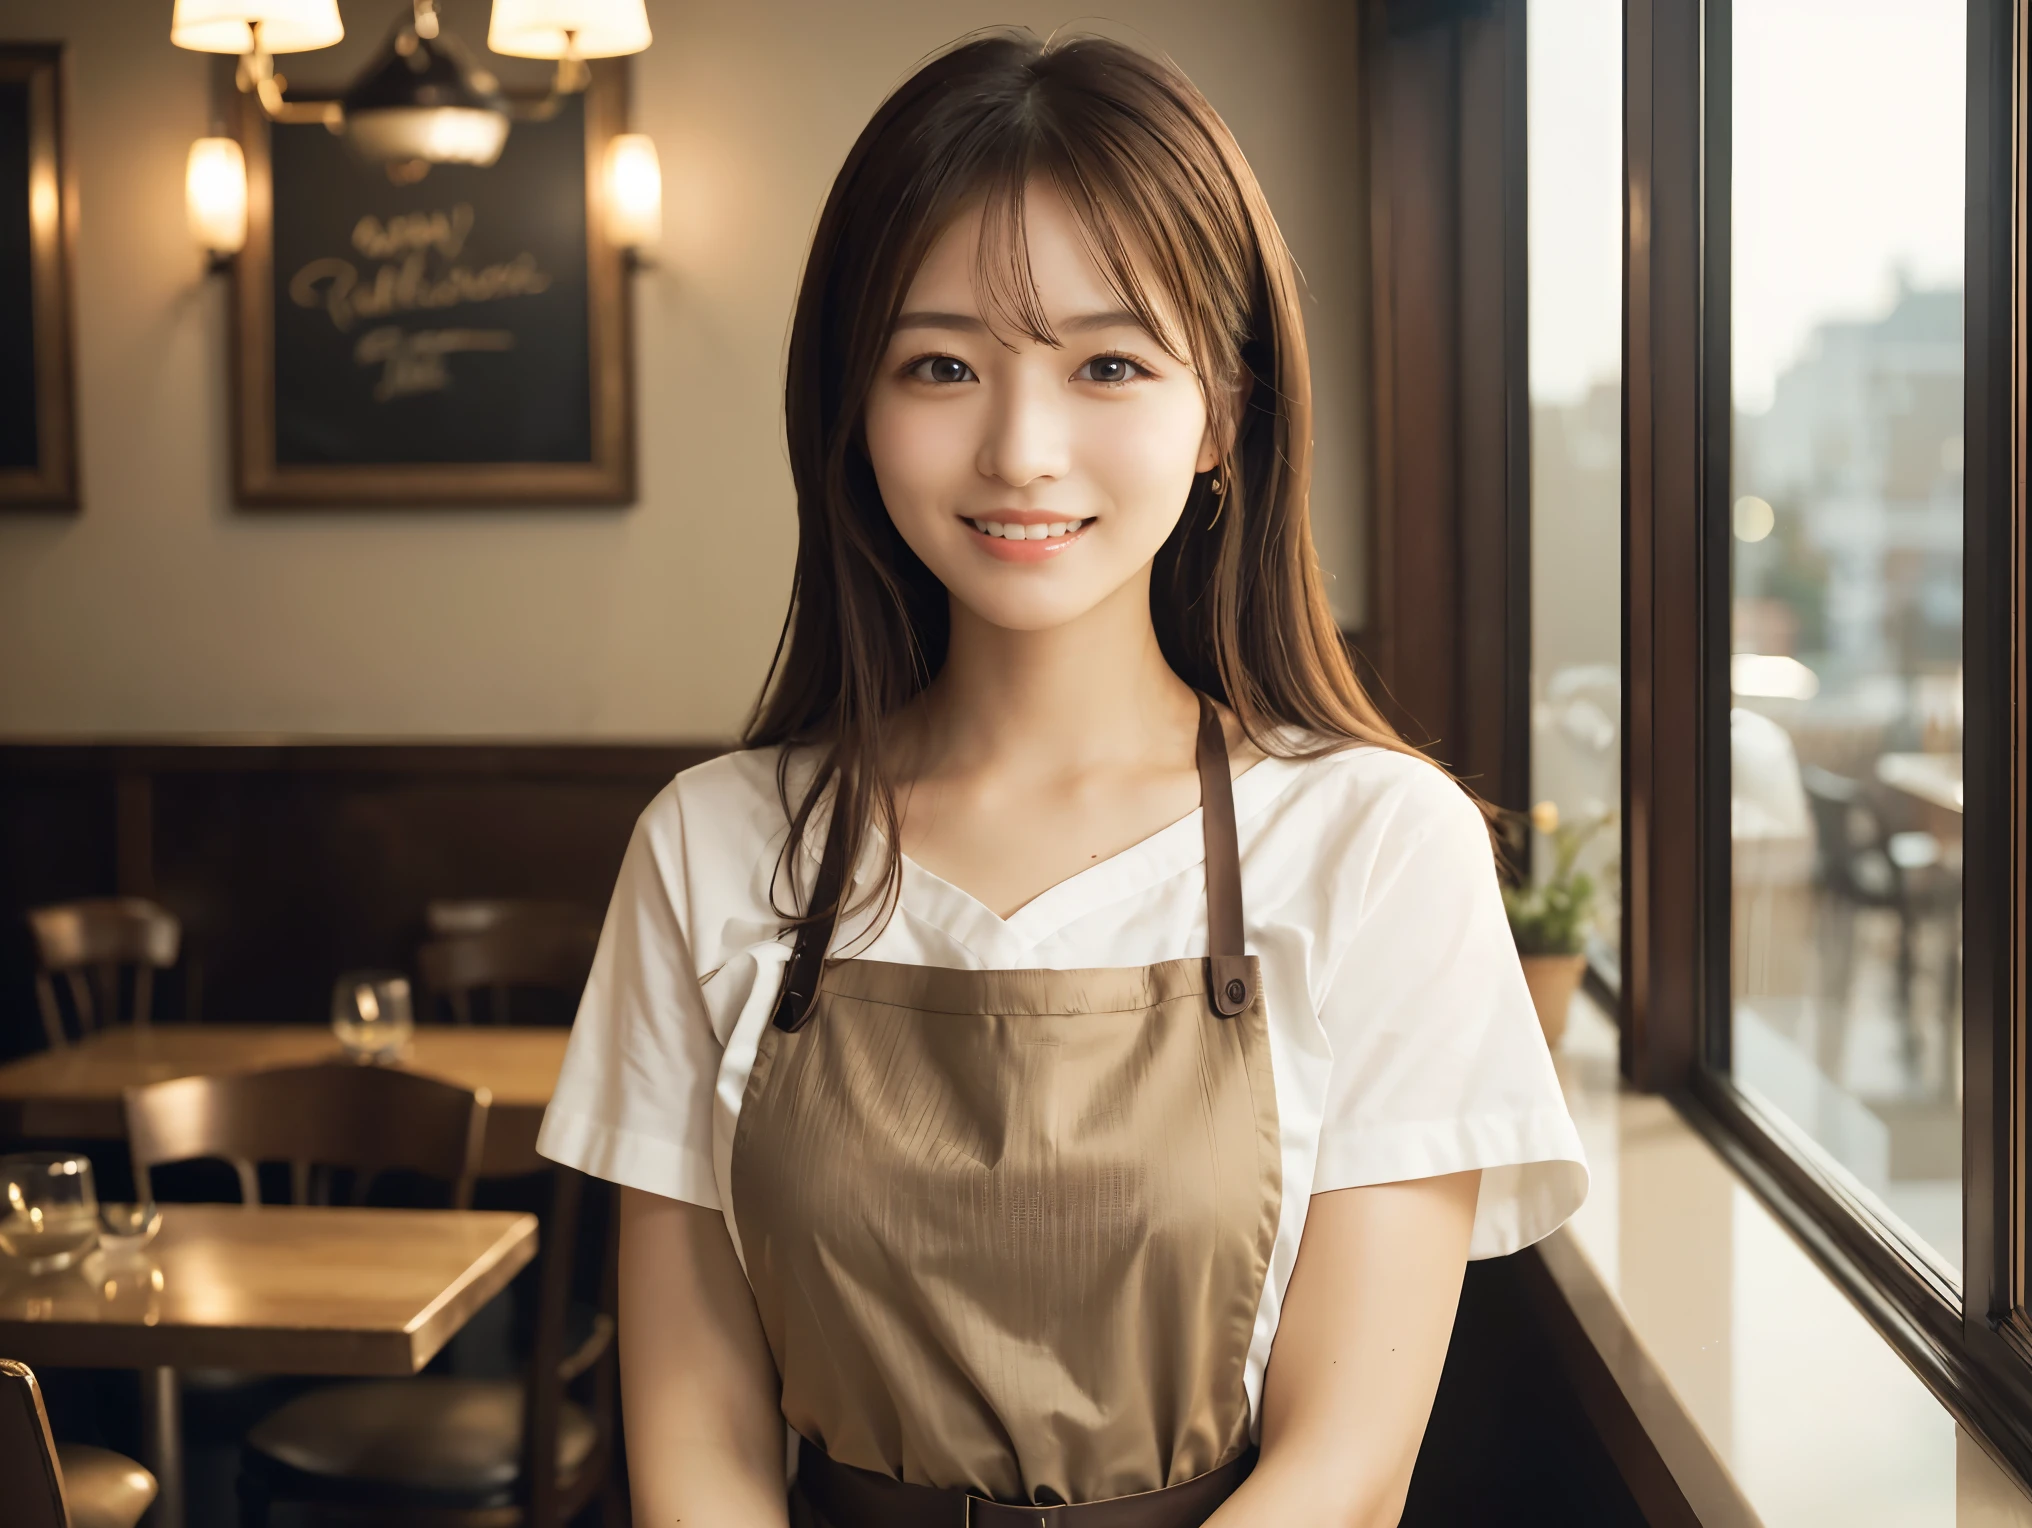 (highest quality、Tabletop、8k、Best image quality、Award-winning works)、Woman working in a café、(The perfect brown apron:1.2)、(Standing elegantly in a cafe:1.1)、(A classy shirt and apron:1.1)、(Big Breasts:1.1)、(Accentuate your body lines:1.1)、Beautiful woman portrait、The most elegant and cozy cafe、The most natural cafe, Perfectly organized、(The moodiest warm lighting:1.1)、(The most romantic atmosphere:1.1)、Stylish and elegant cafe、Strongly blurred background、Look at me and smile、(Accurate anatomy:1.2)、Ultra high resolution perfect beautiful teeth、Ultra-high definition beauty face、Ultra HD Hair、Ultra HD The Shining Eyes、The Shining, Super high quality beautiful skin、Super high quality glossy lip